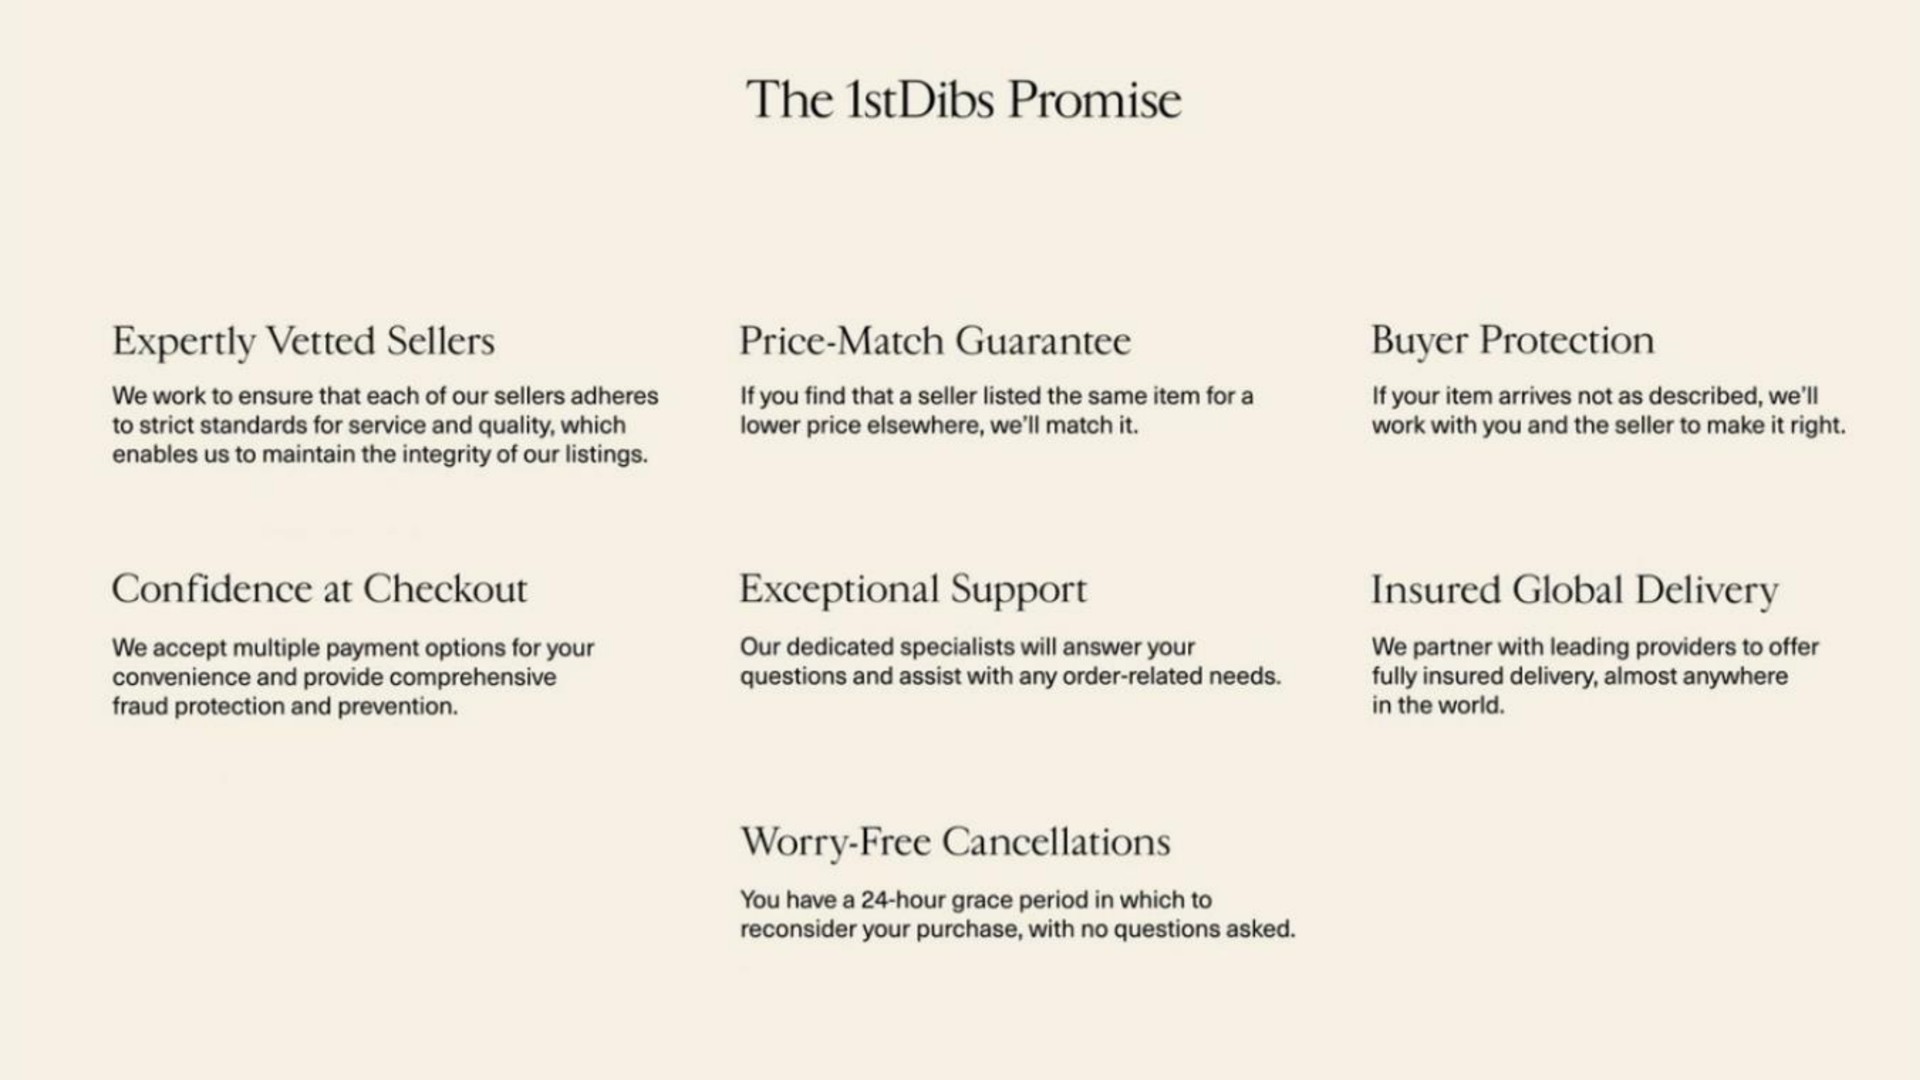 the promise insured global delivery | 1stDibs